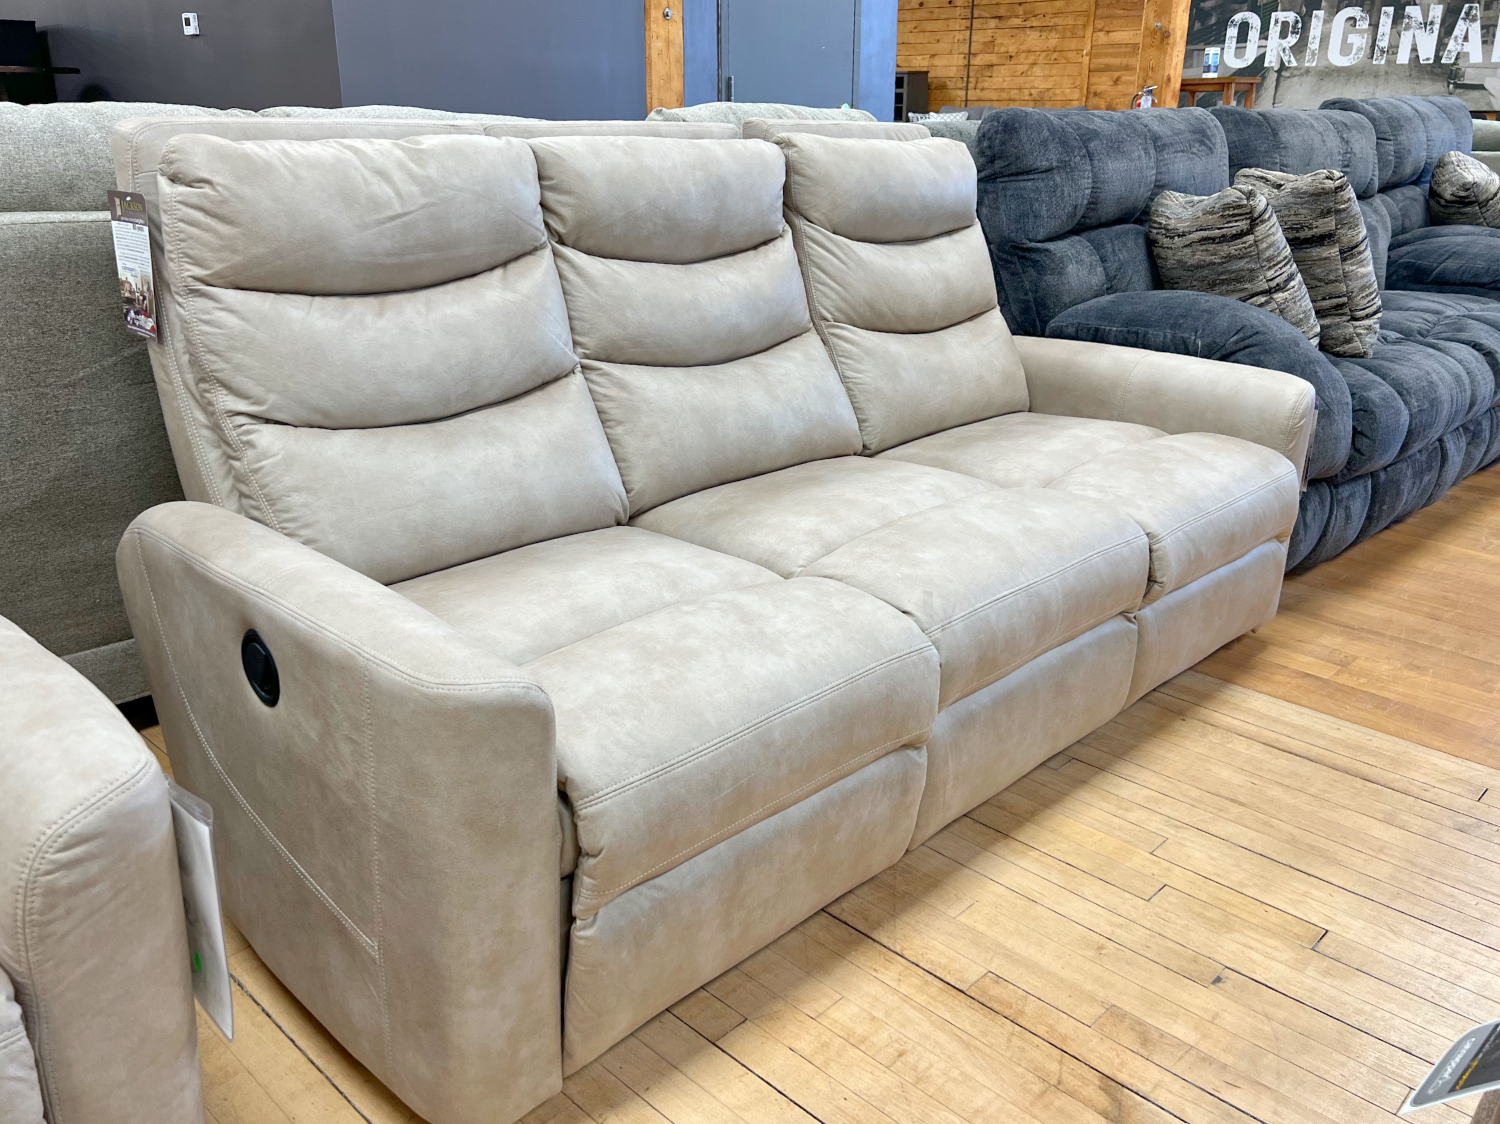 Manual reclining sofa in a light beige suede-look fabric in The Stock Room discount furniture warehouse at Benson Stone Co in Rockford, IL